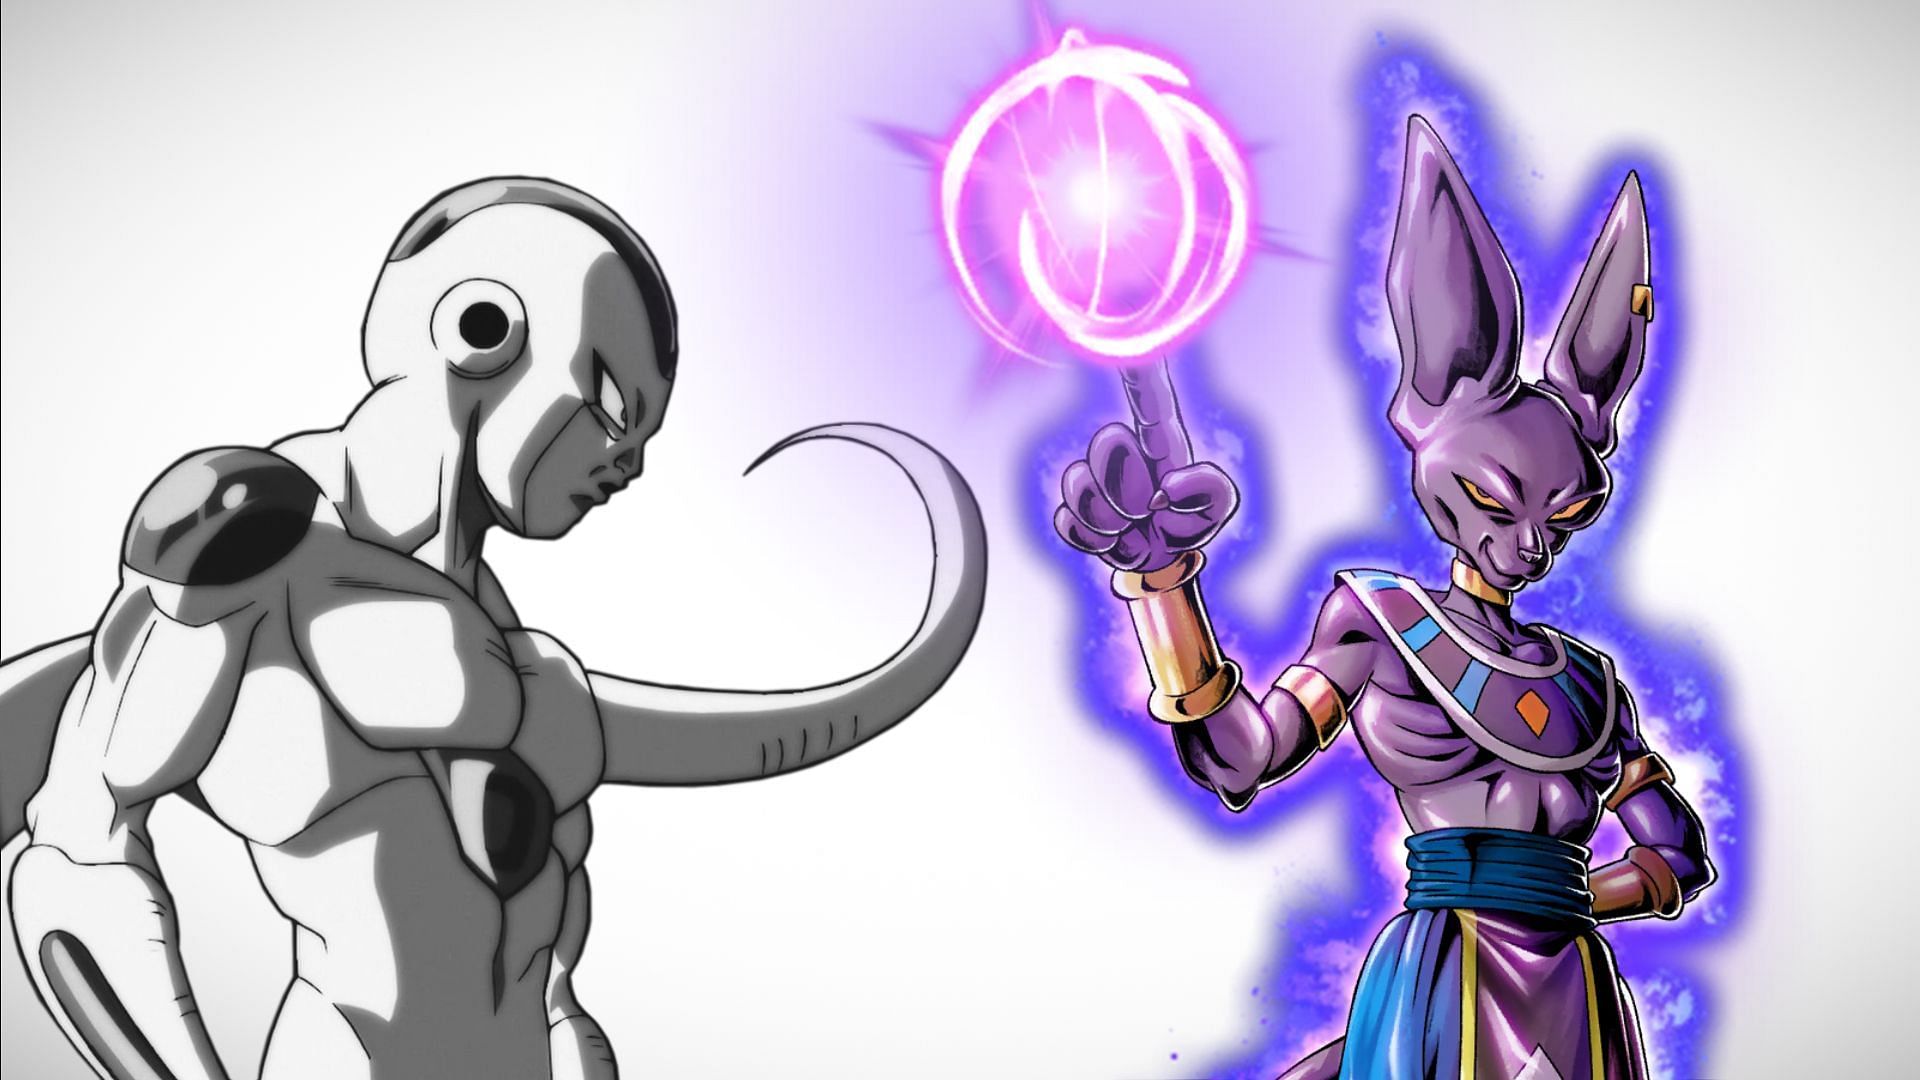 Comparing Black Frieza and Beerus based on power levels and feats (Image via Sportskeeda)